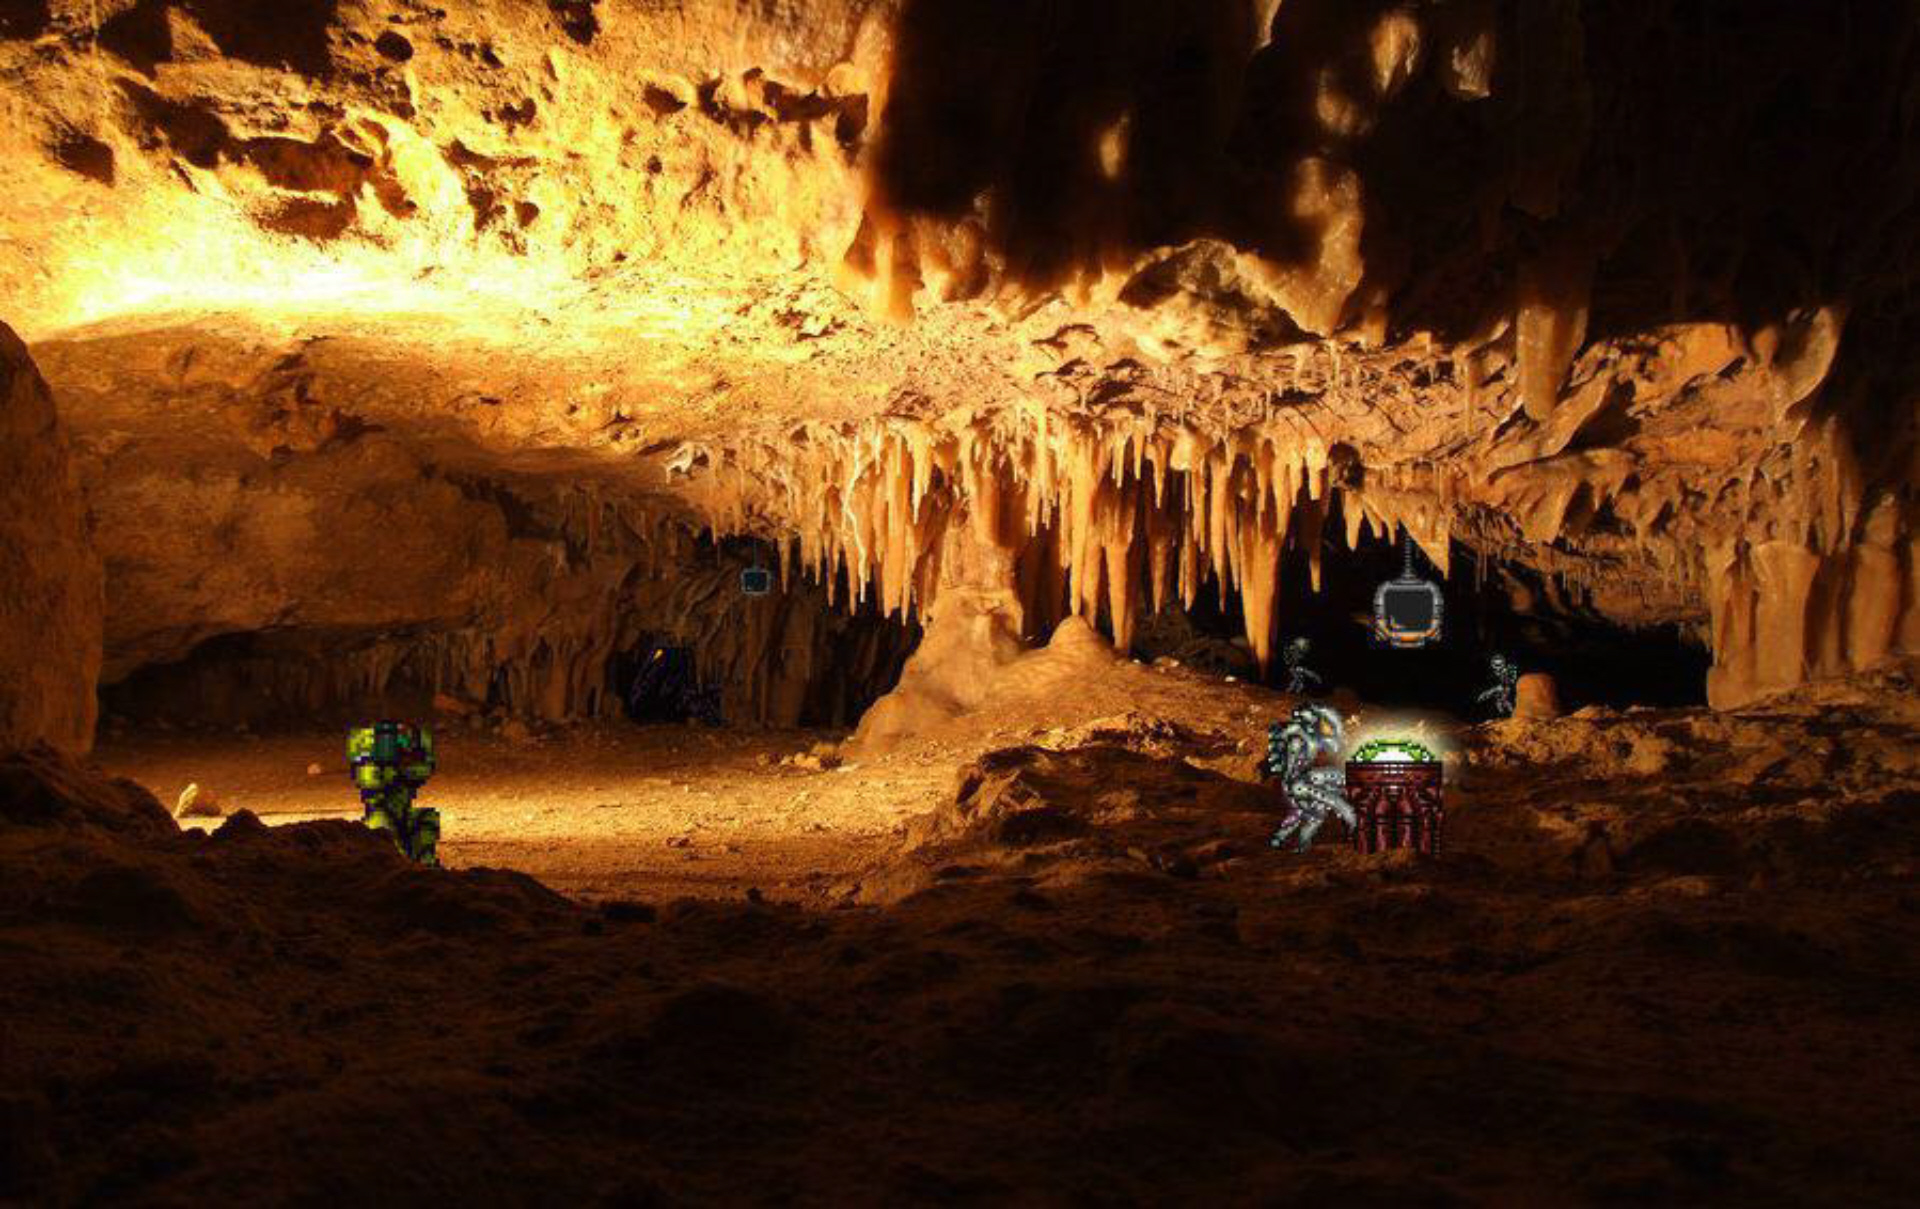  Super Metroid For Real In Cave Wallpaper Artwork Watch Us Play Games